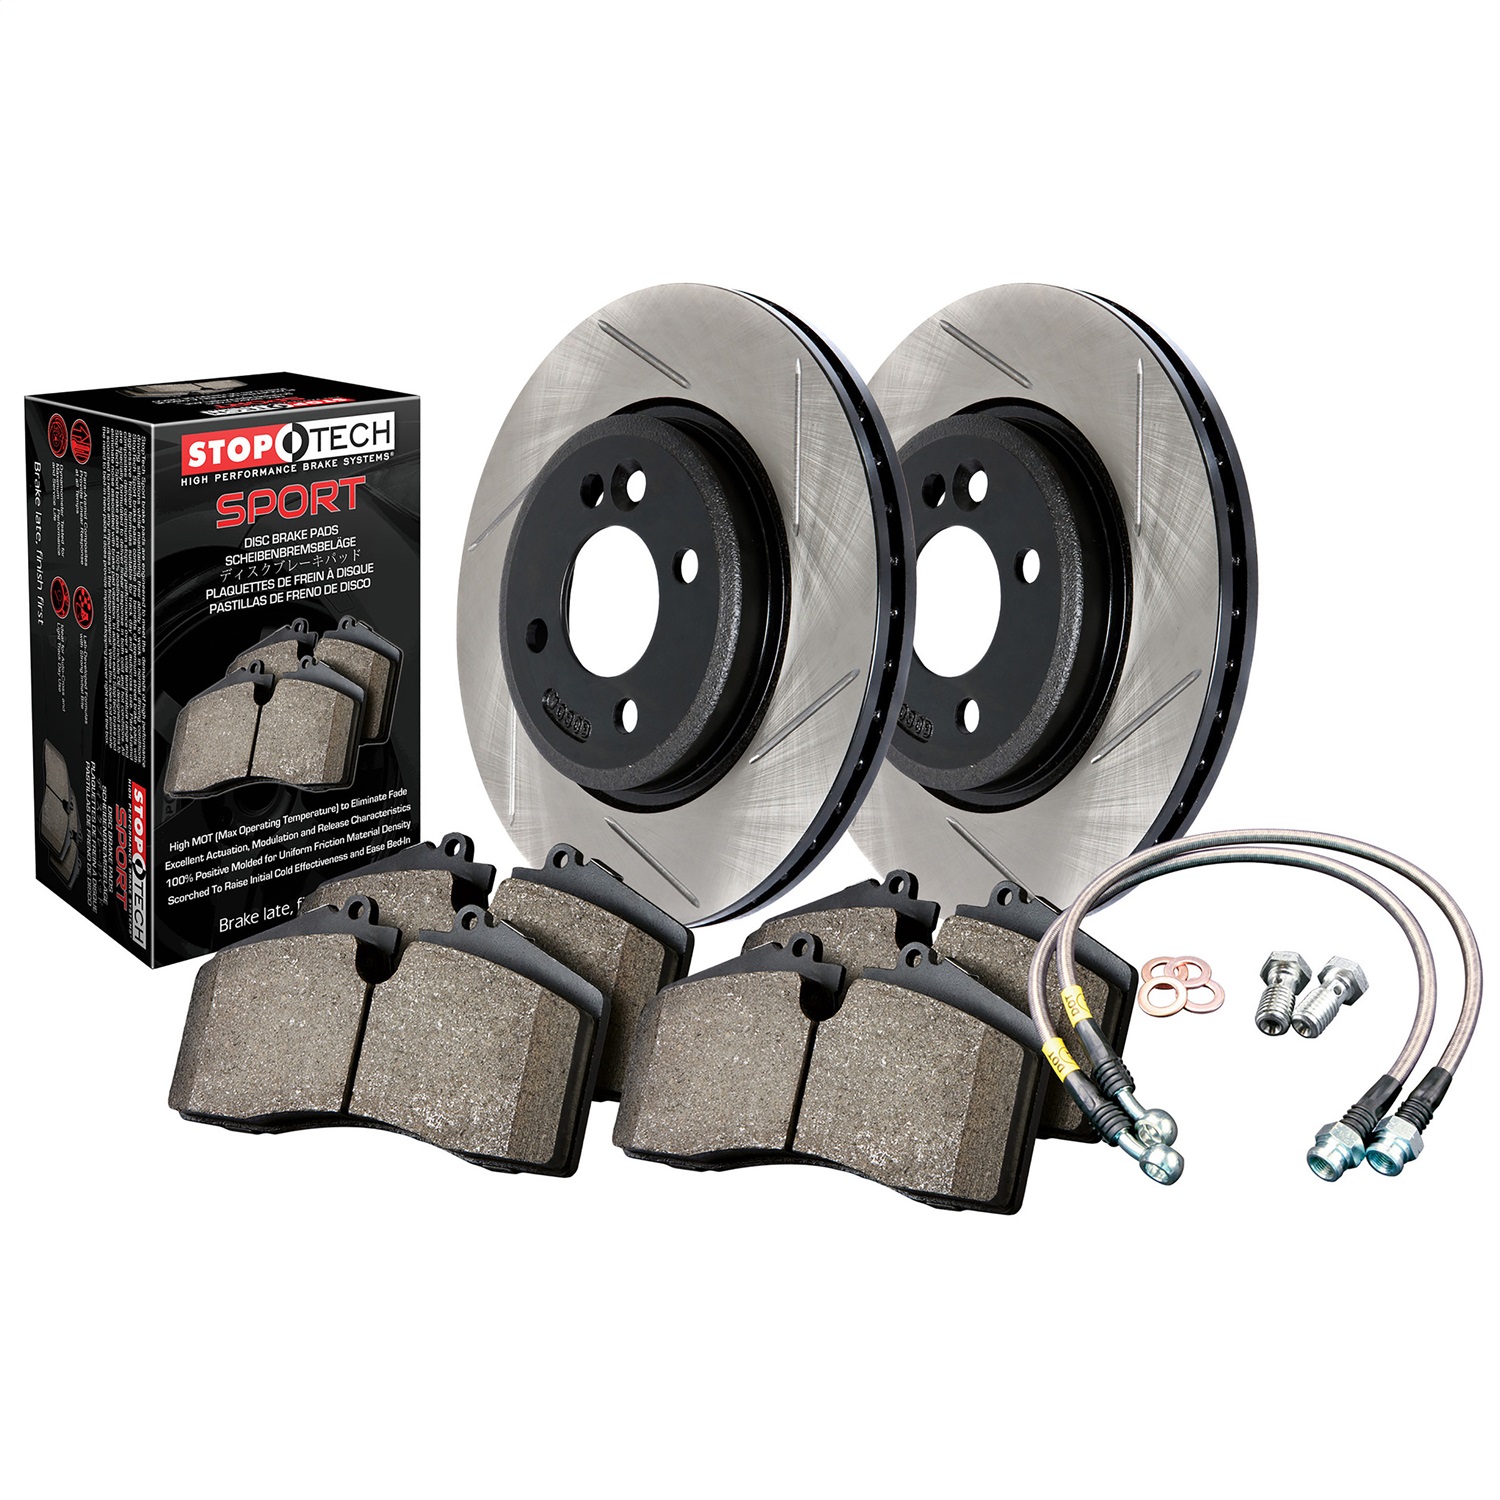 StopTech 977.34075R Sport Disc Brake Kit w/Slotted Rotors